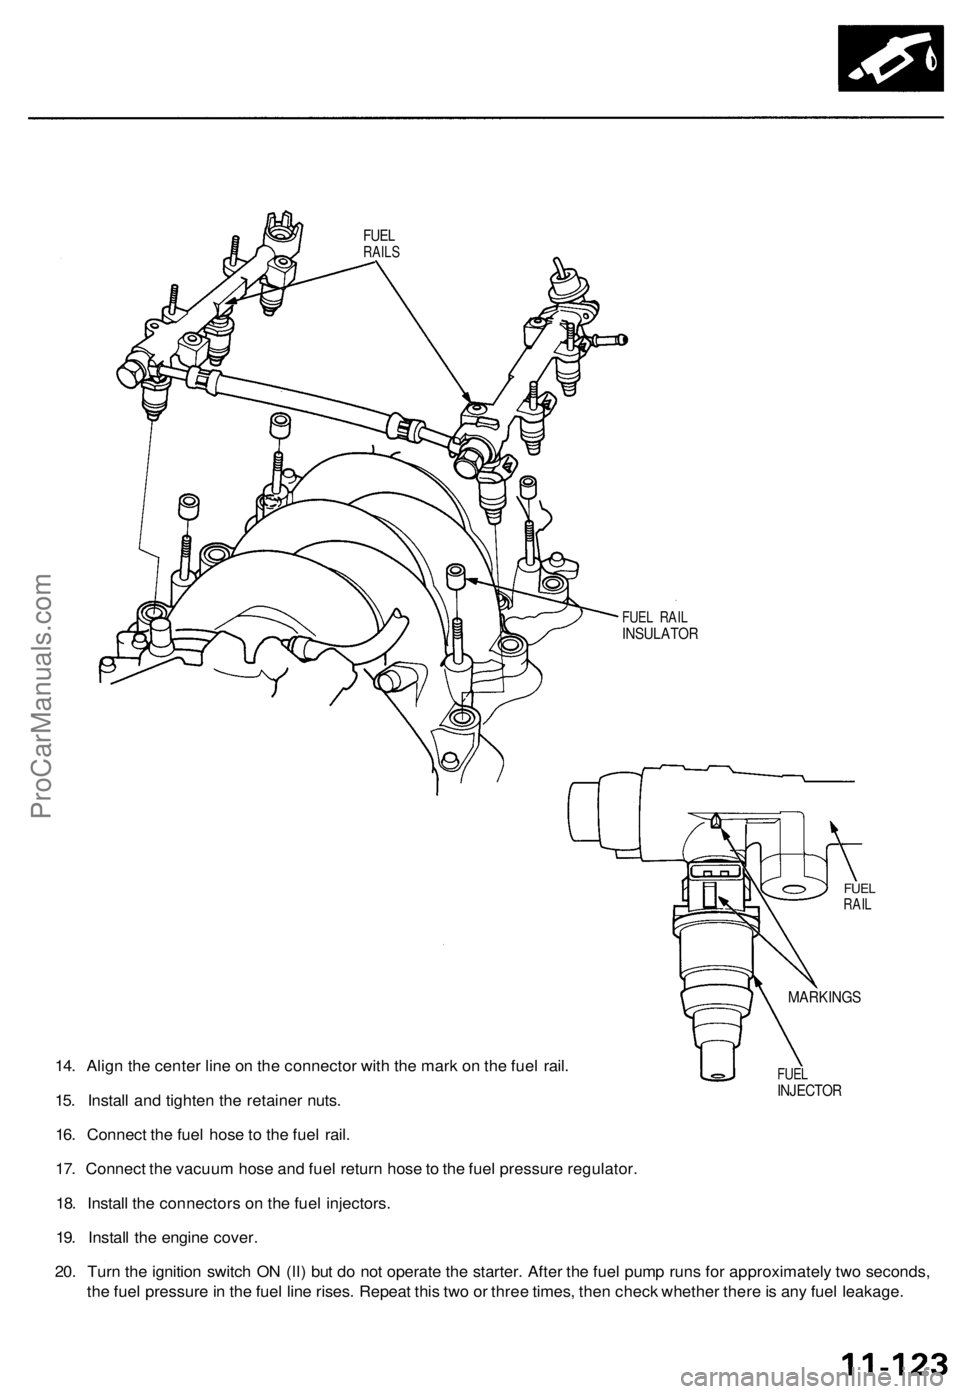 ACURA TL 1995  Service Owners Manual 
14. Align the center line on the connector with the mark on the fuel rail.

15. Install and tighten the retainer nuts.

16. Connect the fuel hose to the fuel rail.

17. Connect the vacuum hose and fu